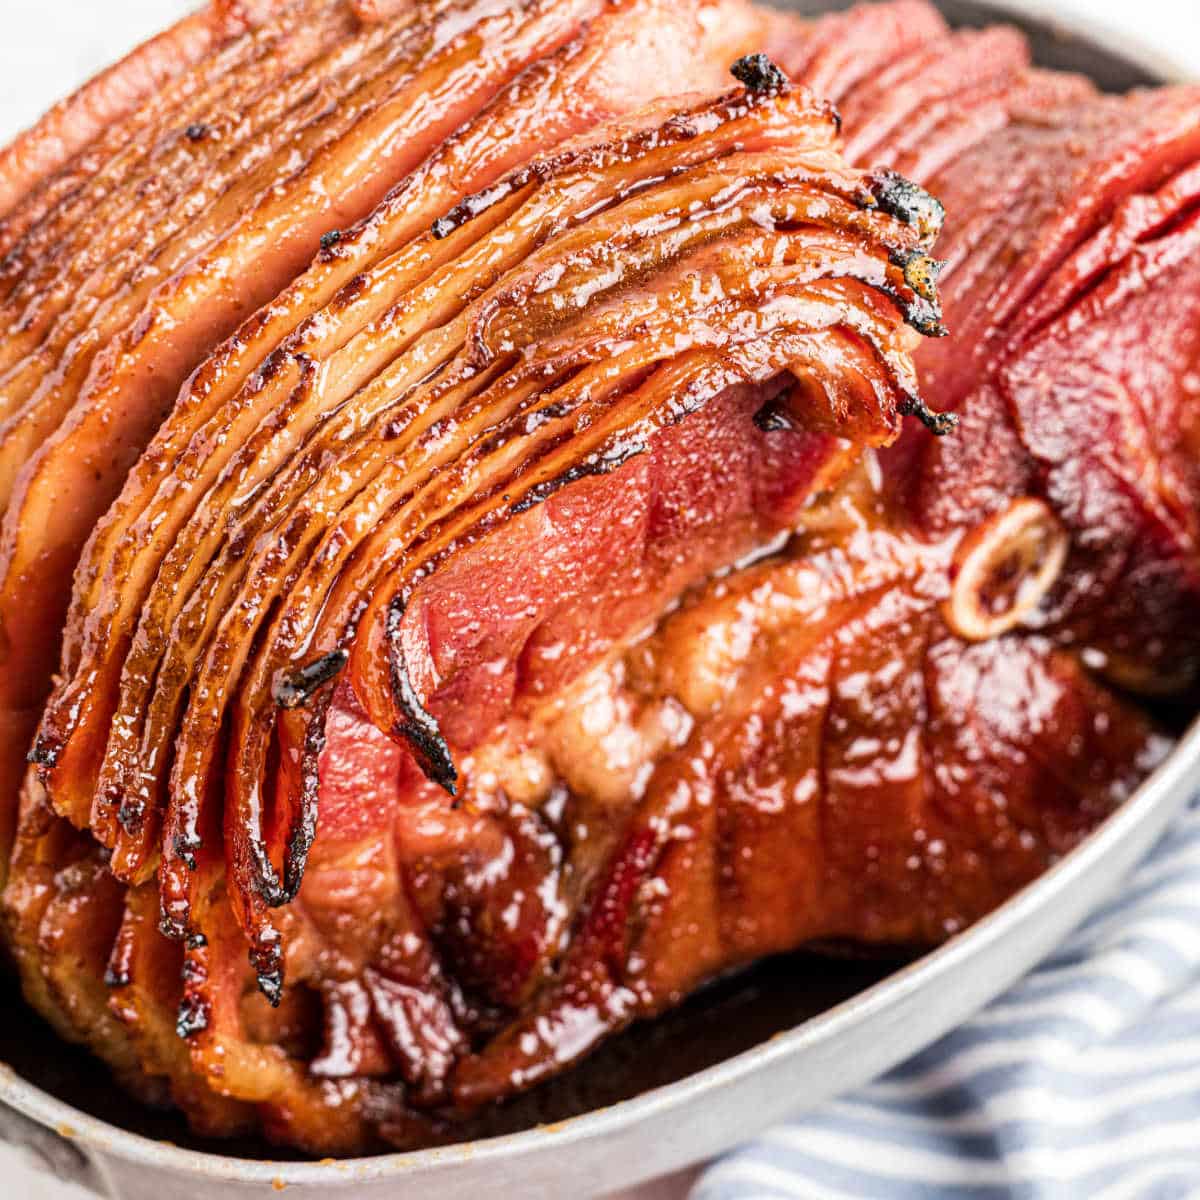 A southern coca-cola ham recipe, finished cooking.